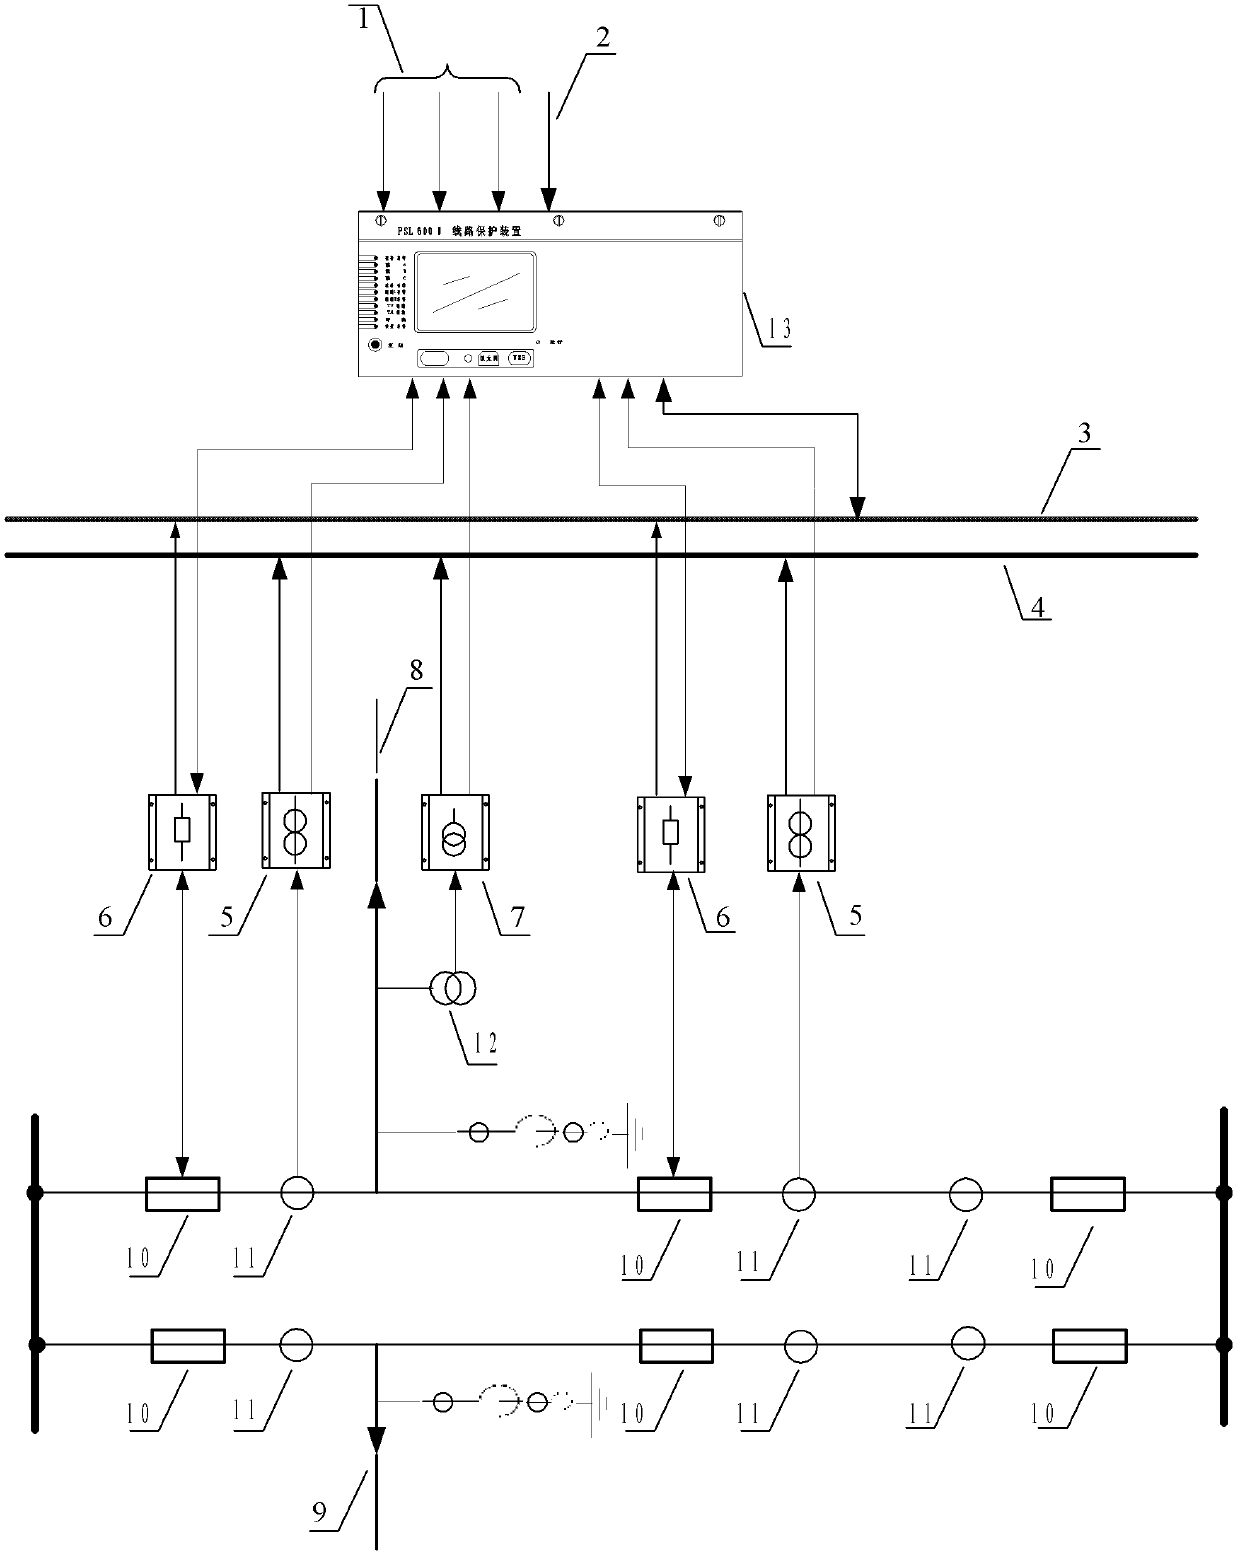 Self-adaptive distance protection method for double-circuit line of intelligent substation